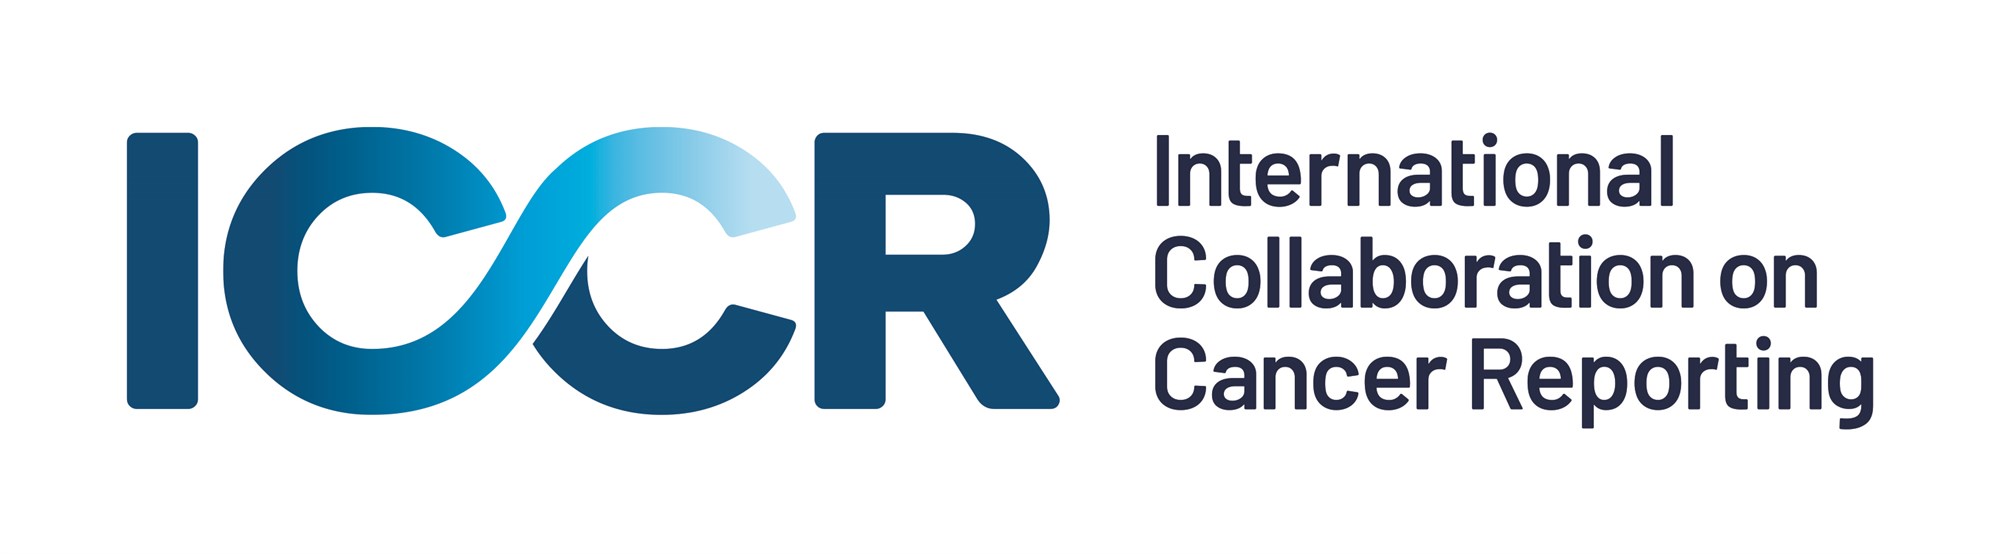 ICCR Datasets: Recent Updates and Invitation to Review image